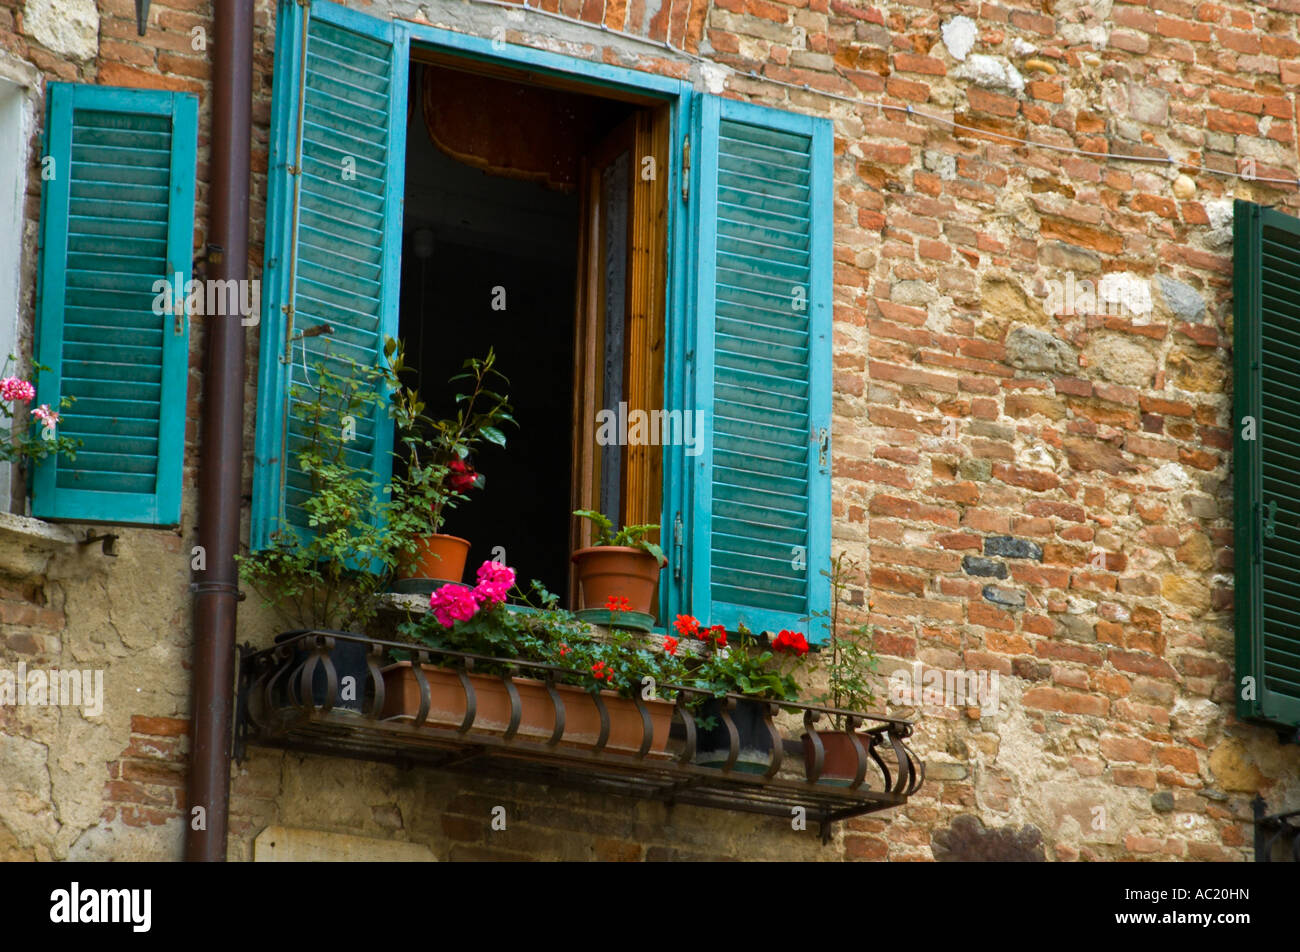 Window with teal shutters in a village in the Tuscany region of Italy Stock Photo